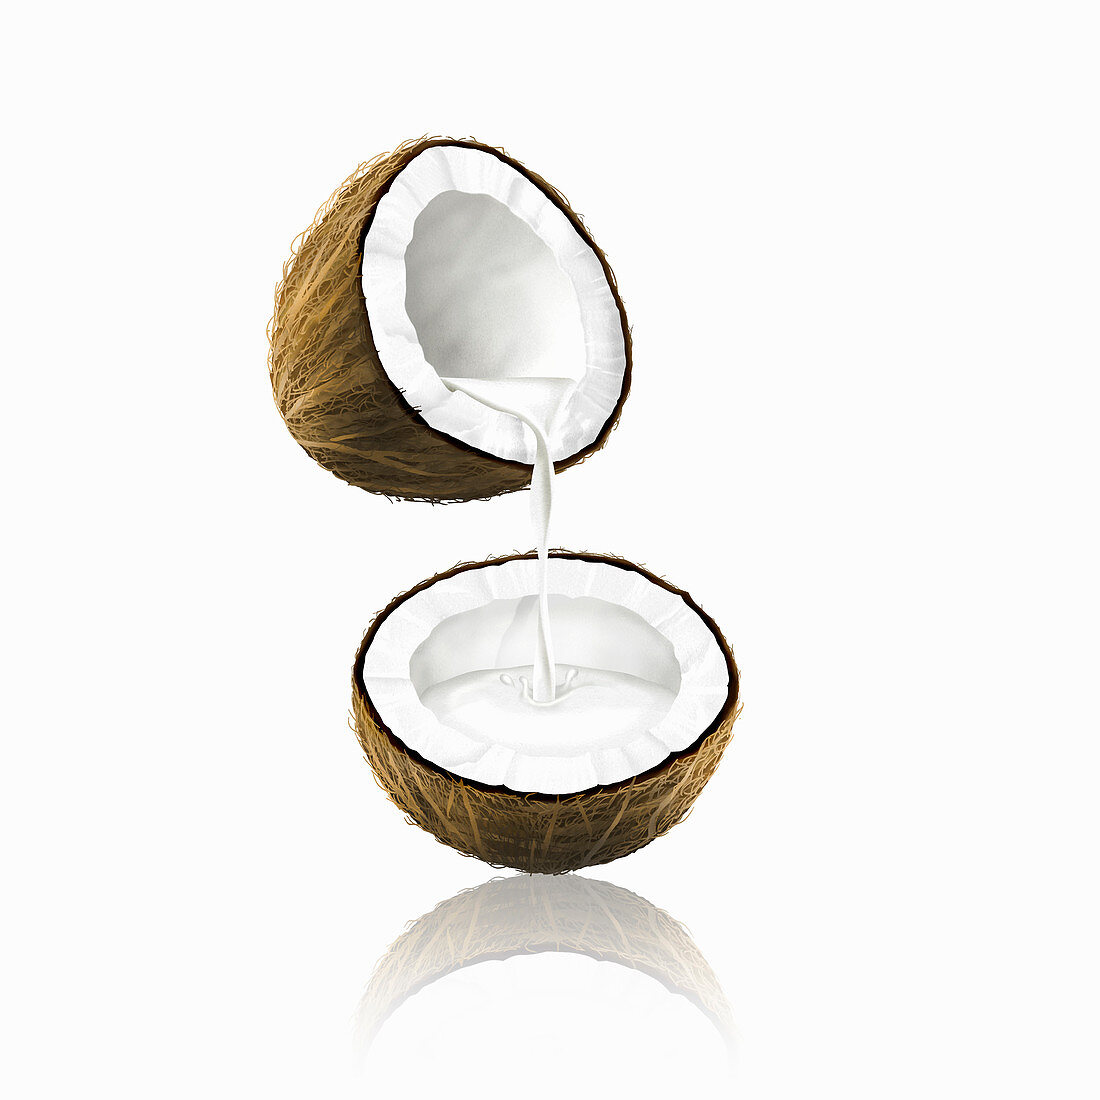 Coconut milk pouring from coconut, illustration